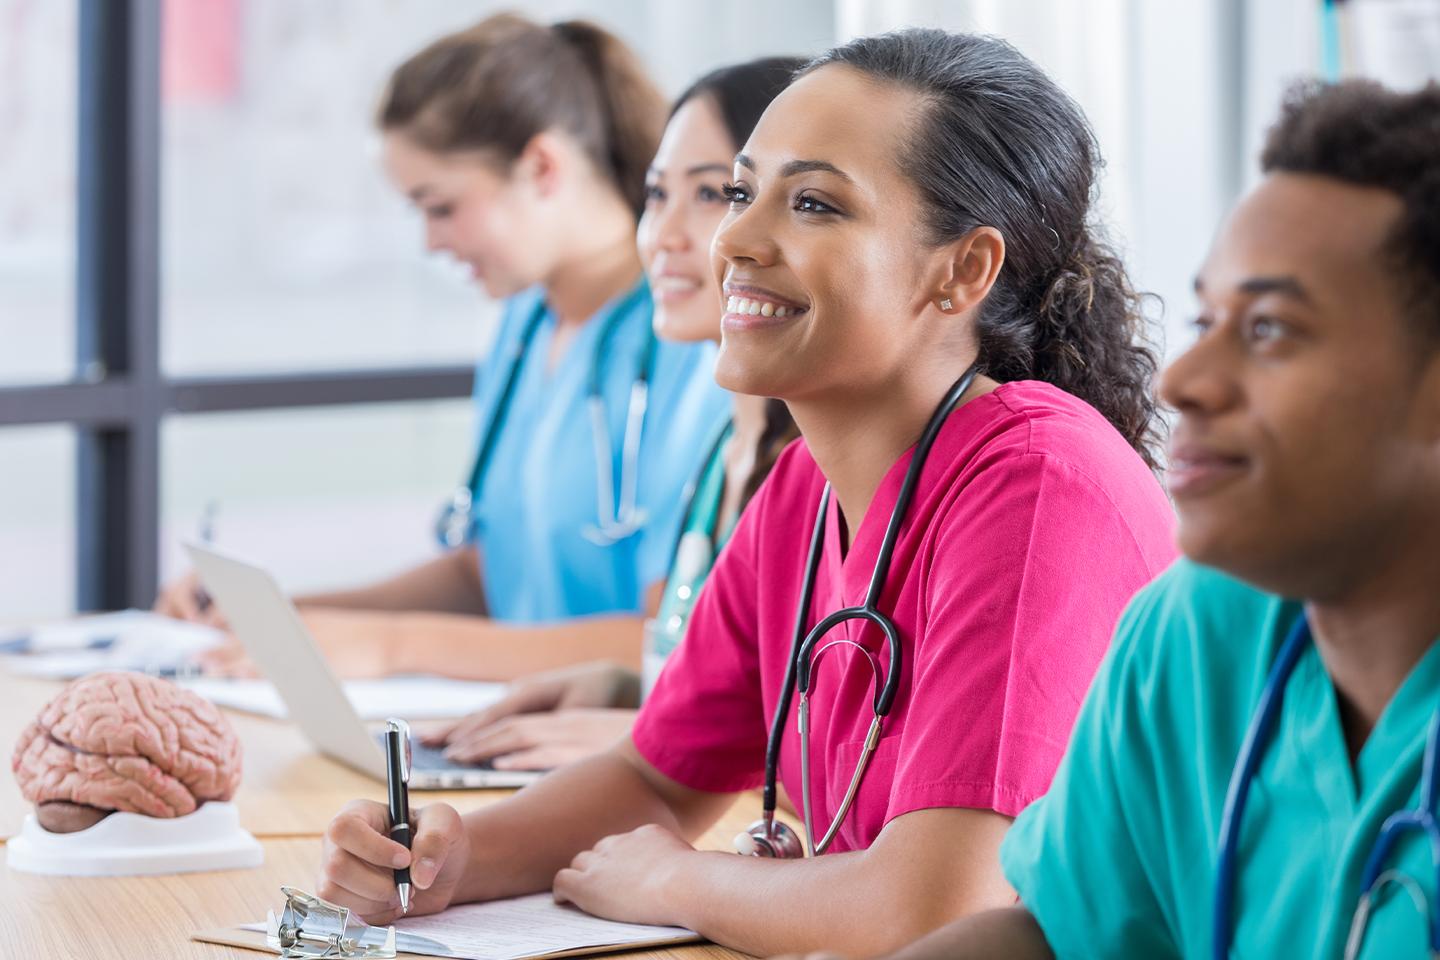 We’re Pleased to Announce the Cross Country Healthcare Nursing Scholarship Fund